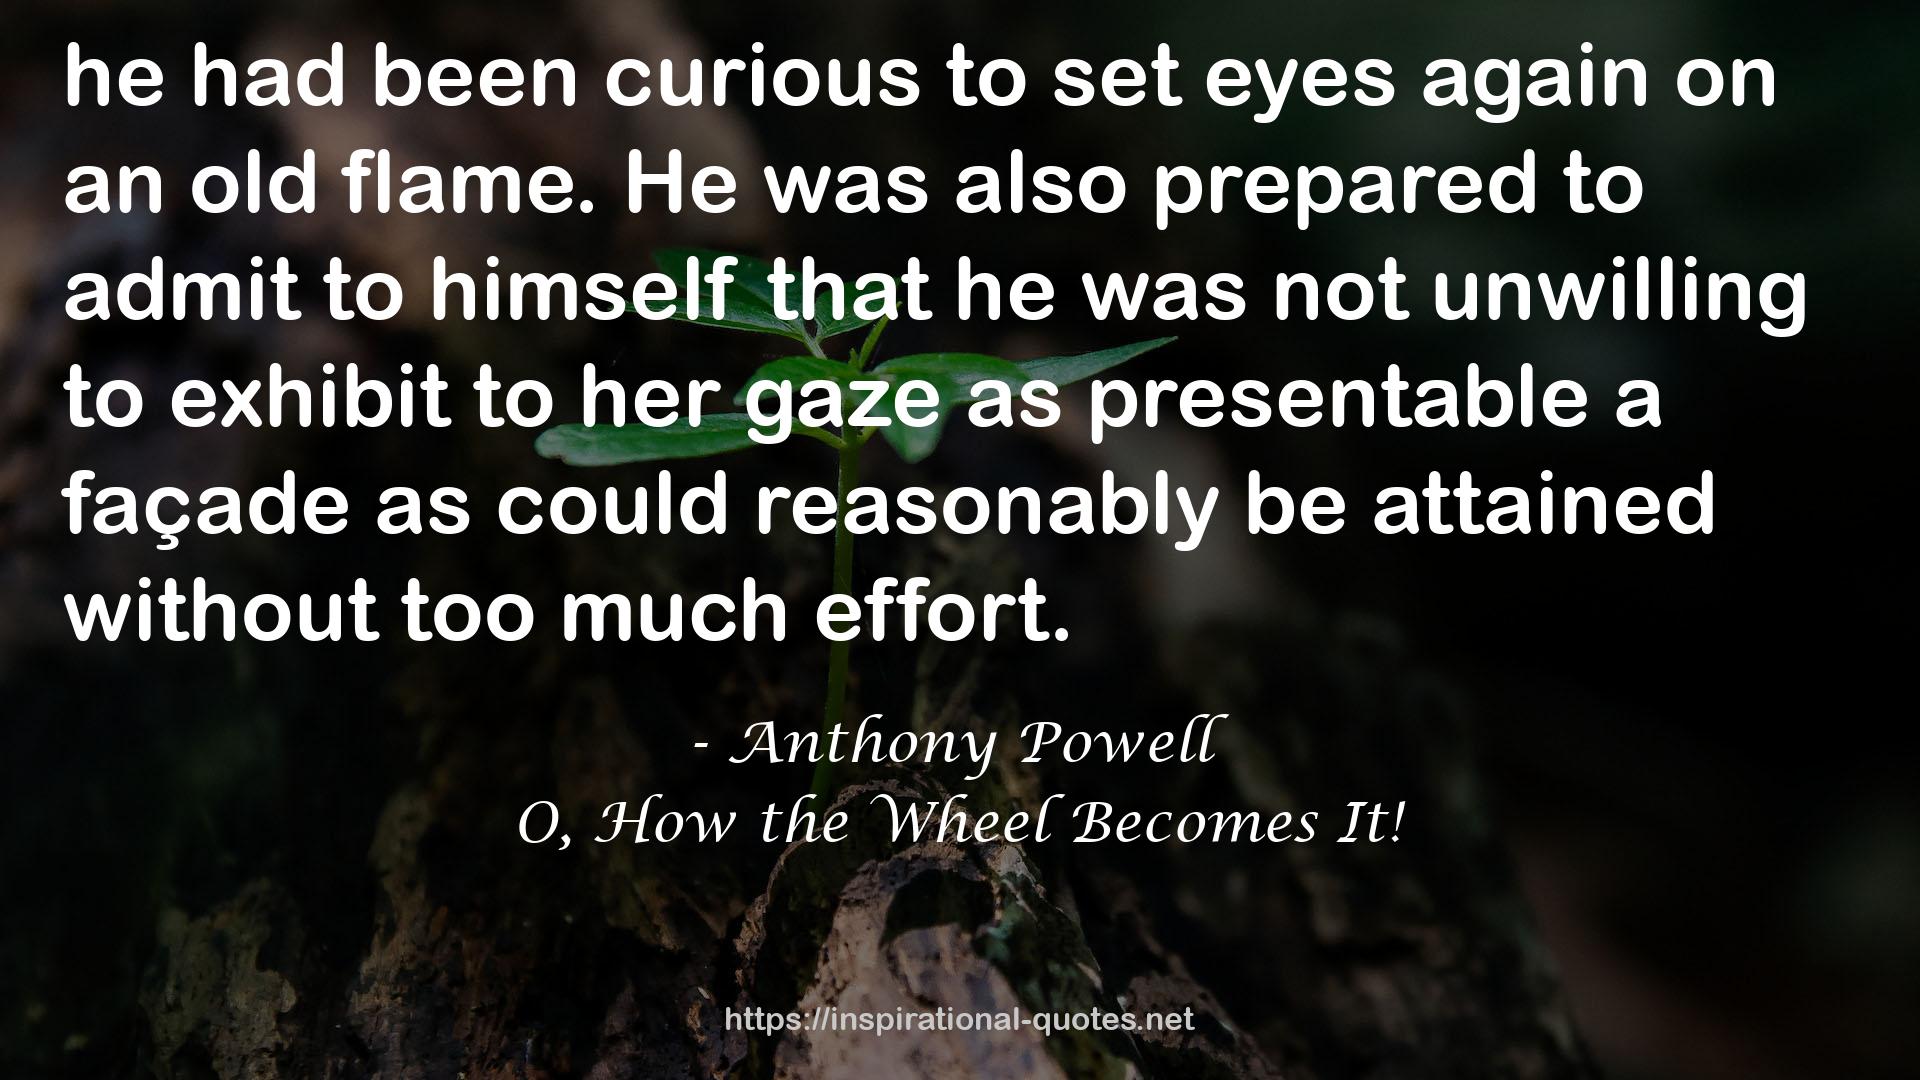 O, How the Wheel Becomes It! QUOTES